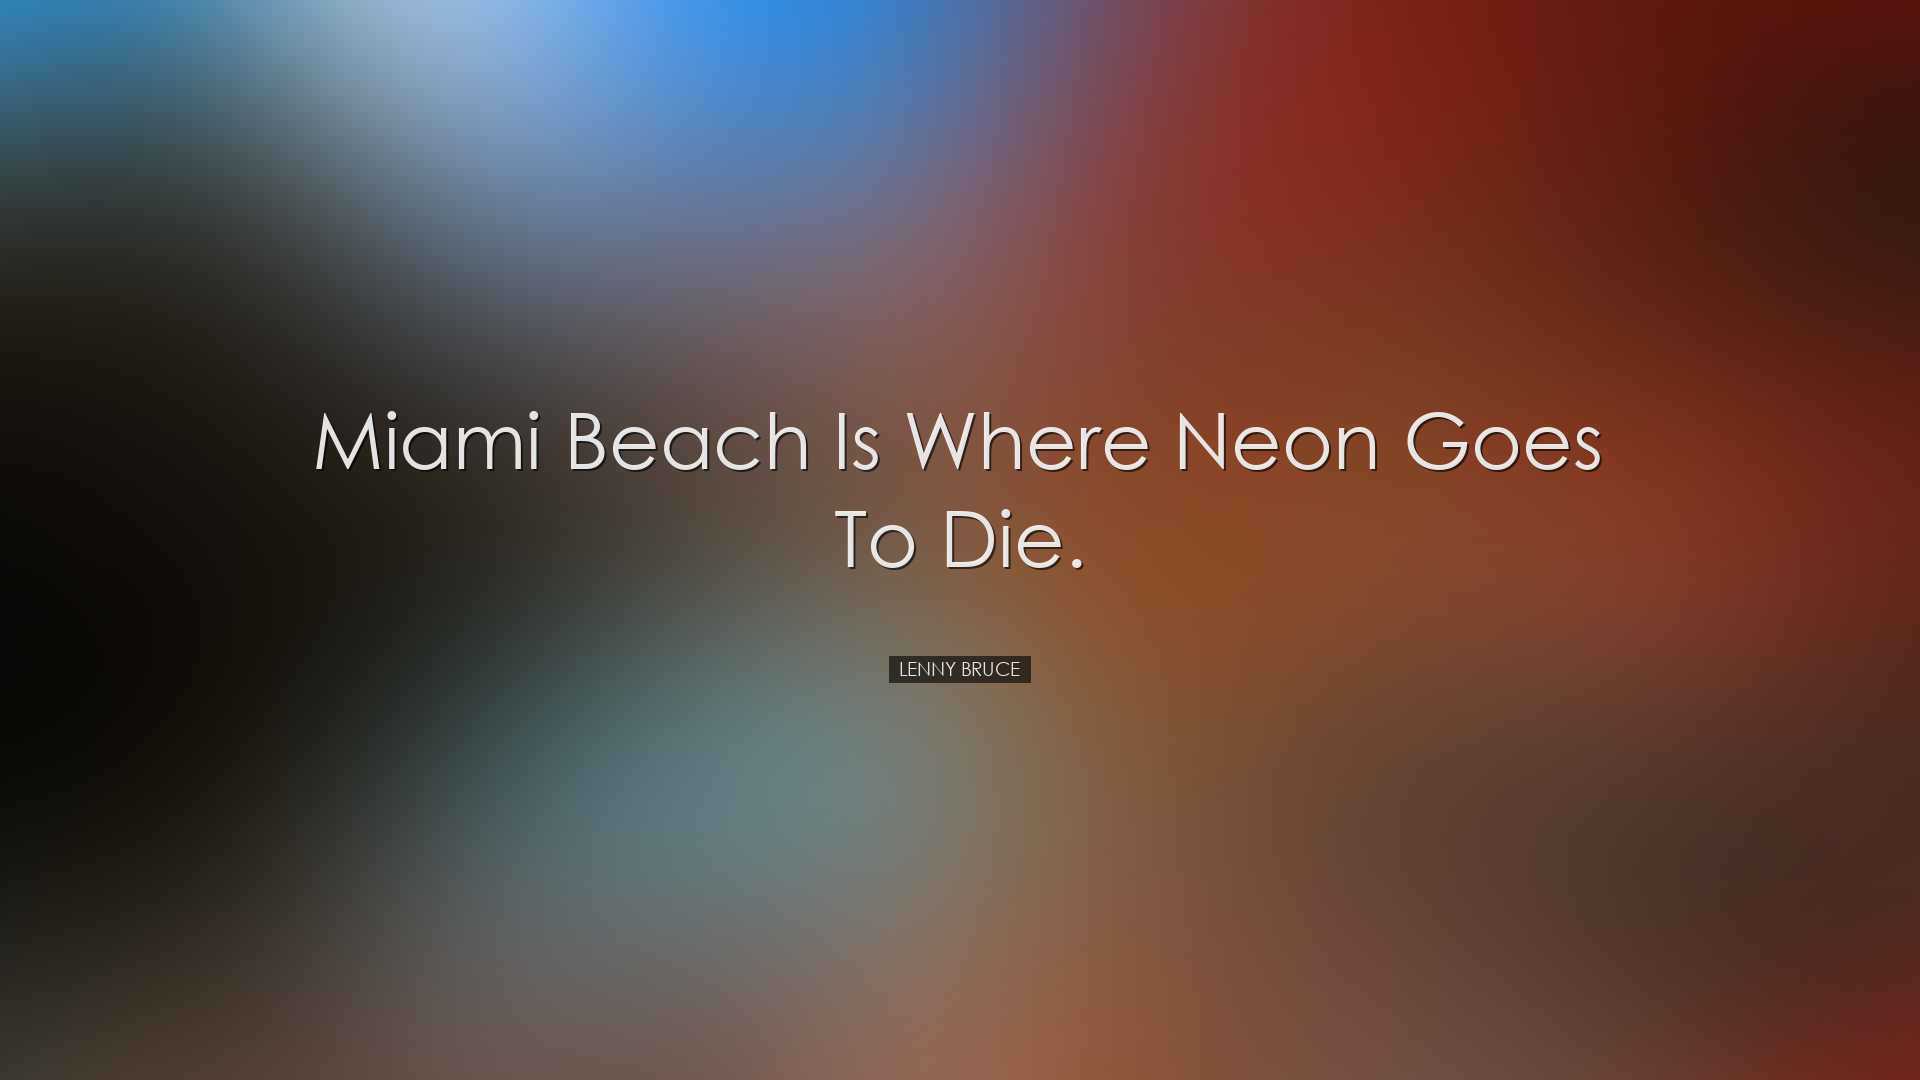 Miami Beach is where neon goes to die. - Lenny Bruce